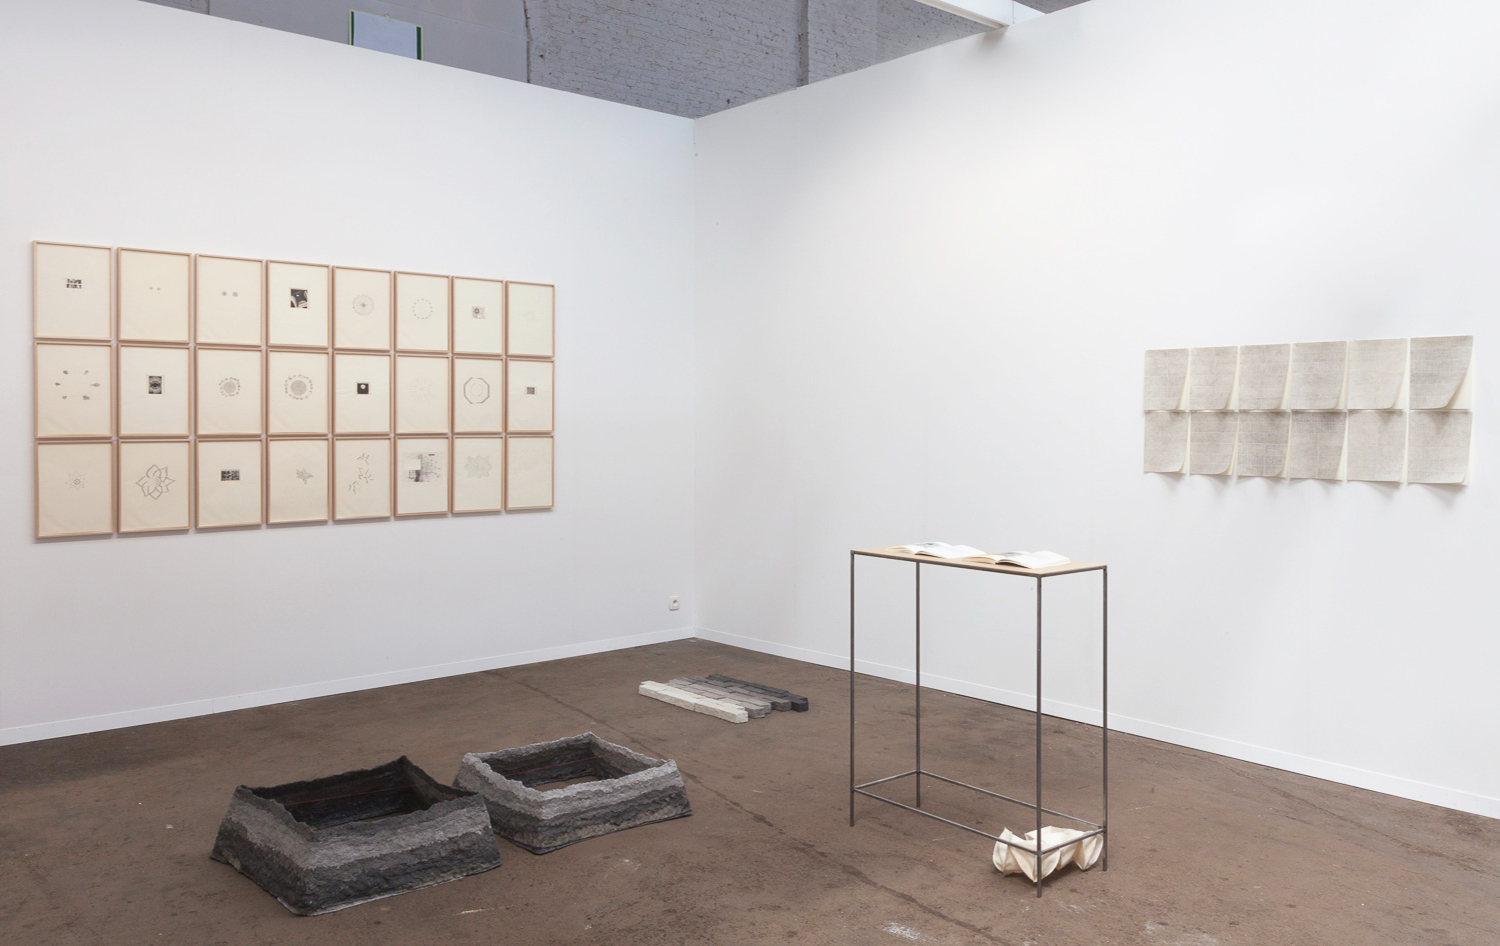 austerlitz's drawings, untitled (sediment, ruins), other stains, silent sisters, atemwende